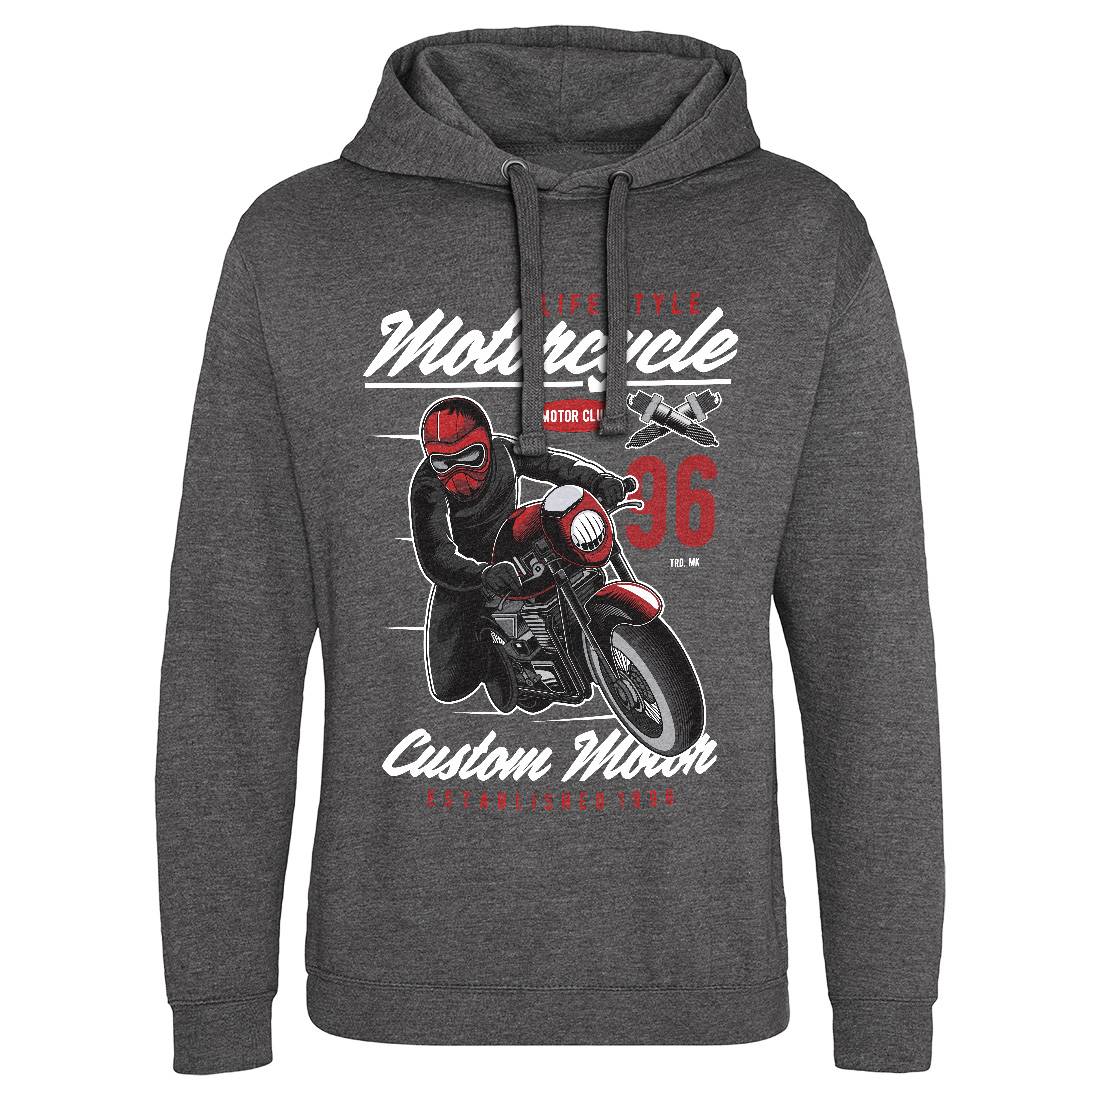 Lifestyle Mens Hoodie Without Pocket Motorcycles C399